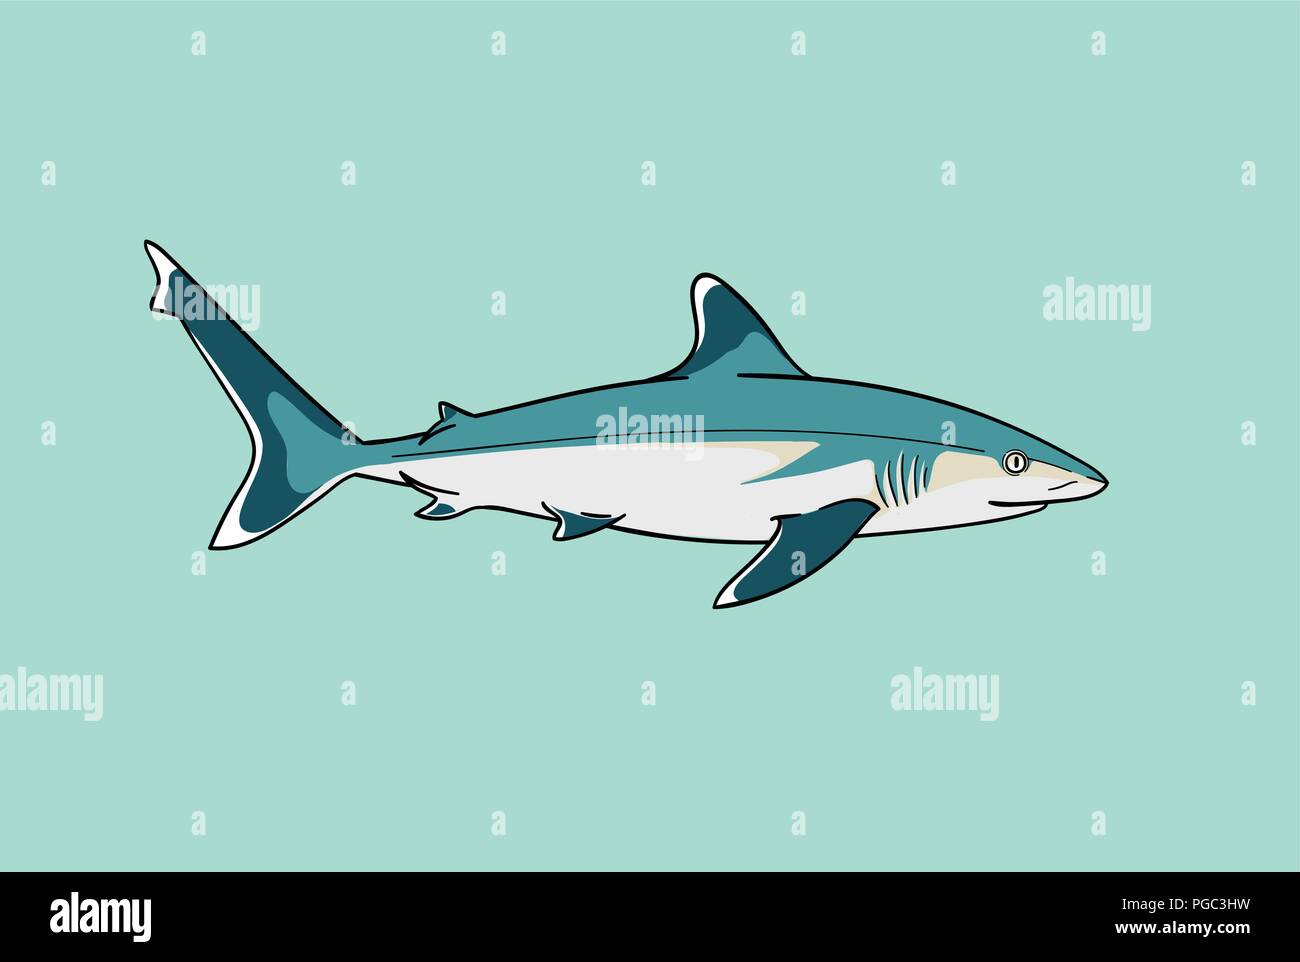 Reef Stock Vector Images - Alamy